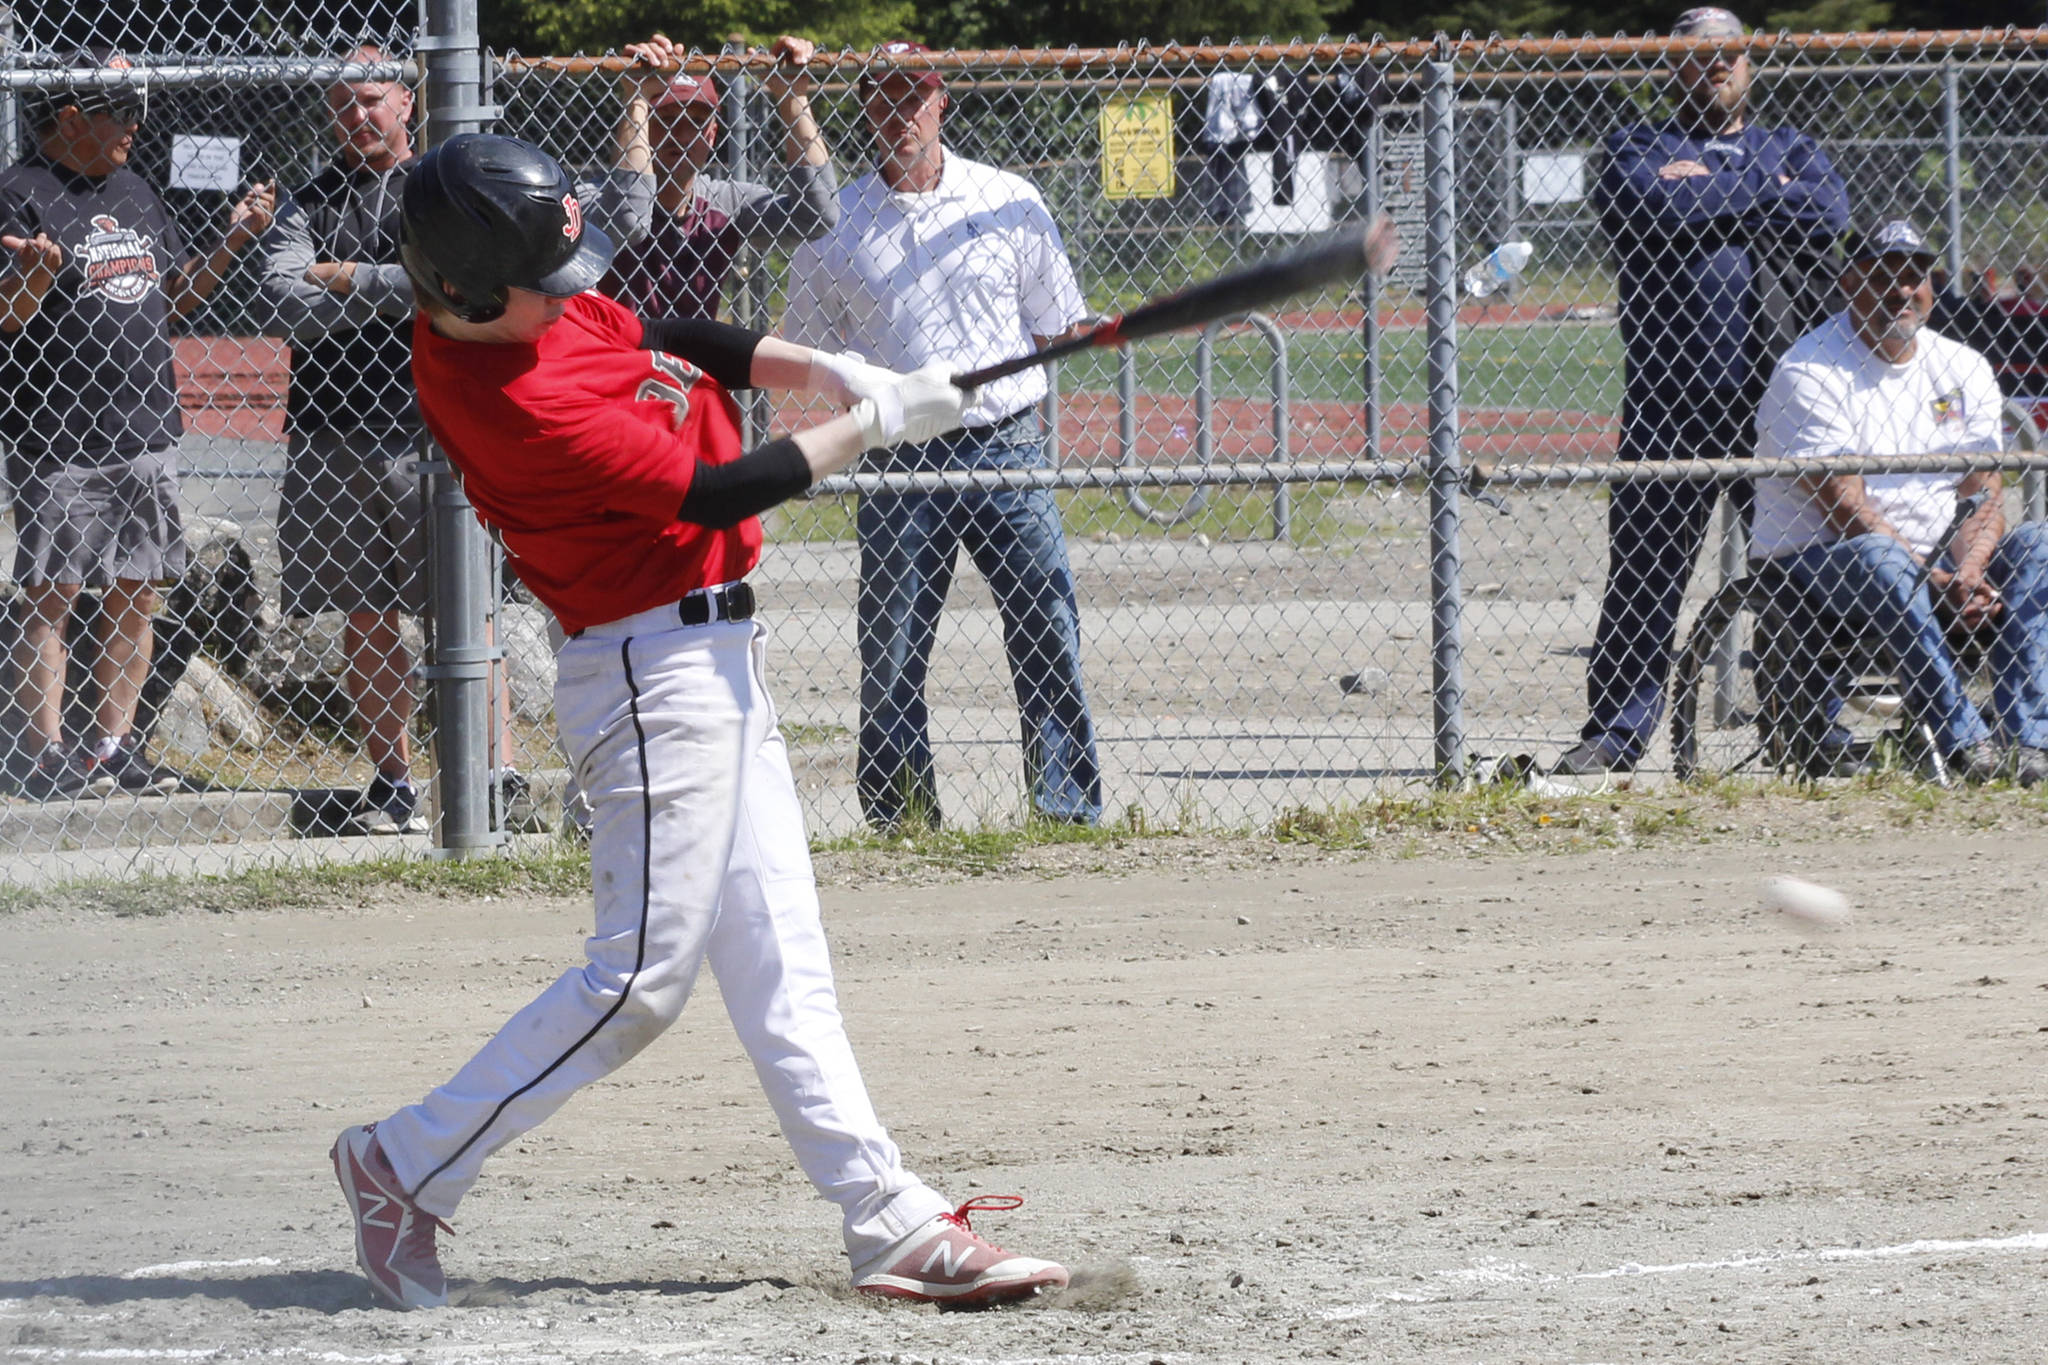 Juneau-Douglas High School: Yadaa.at Kale infielder Austin McCurley hits a ground ball in the Region V title game against Ketchikan on Saturday, May 25, 2019. (Alex McCarthy | Juneau Empire)